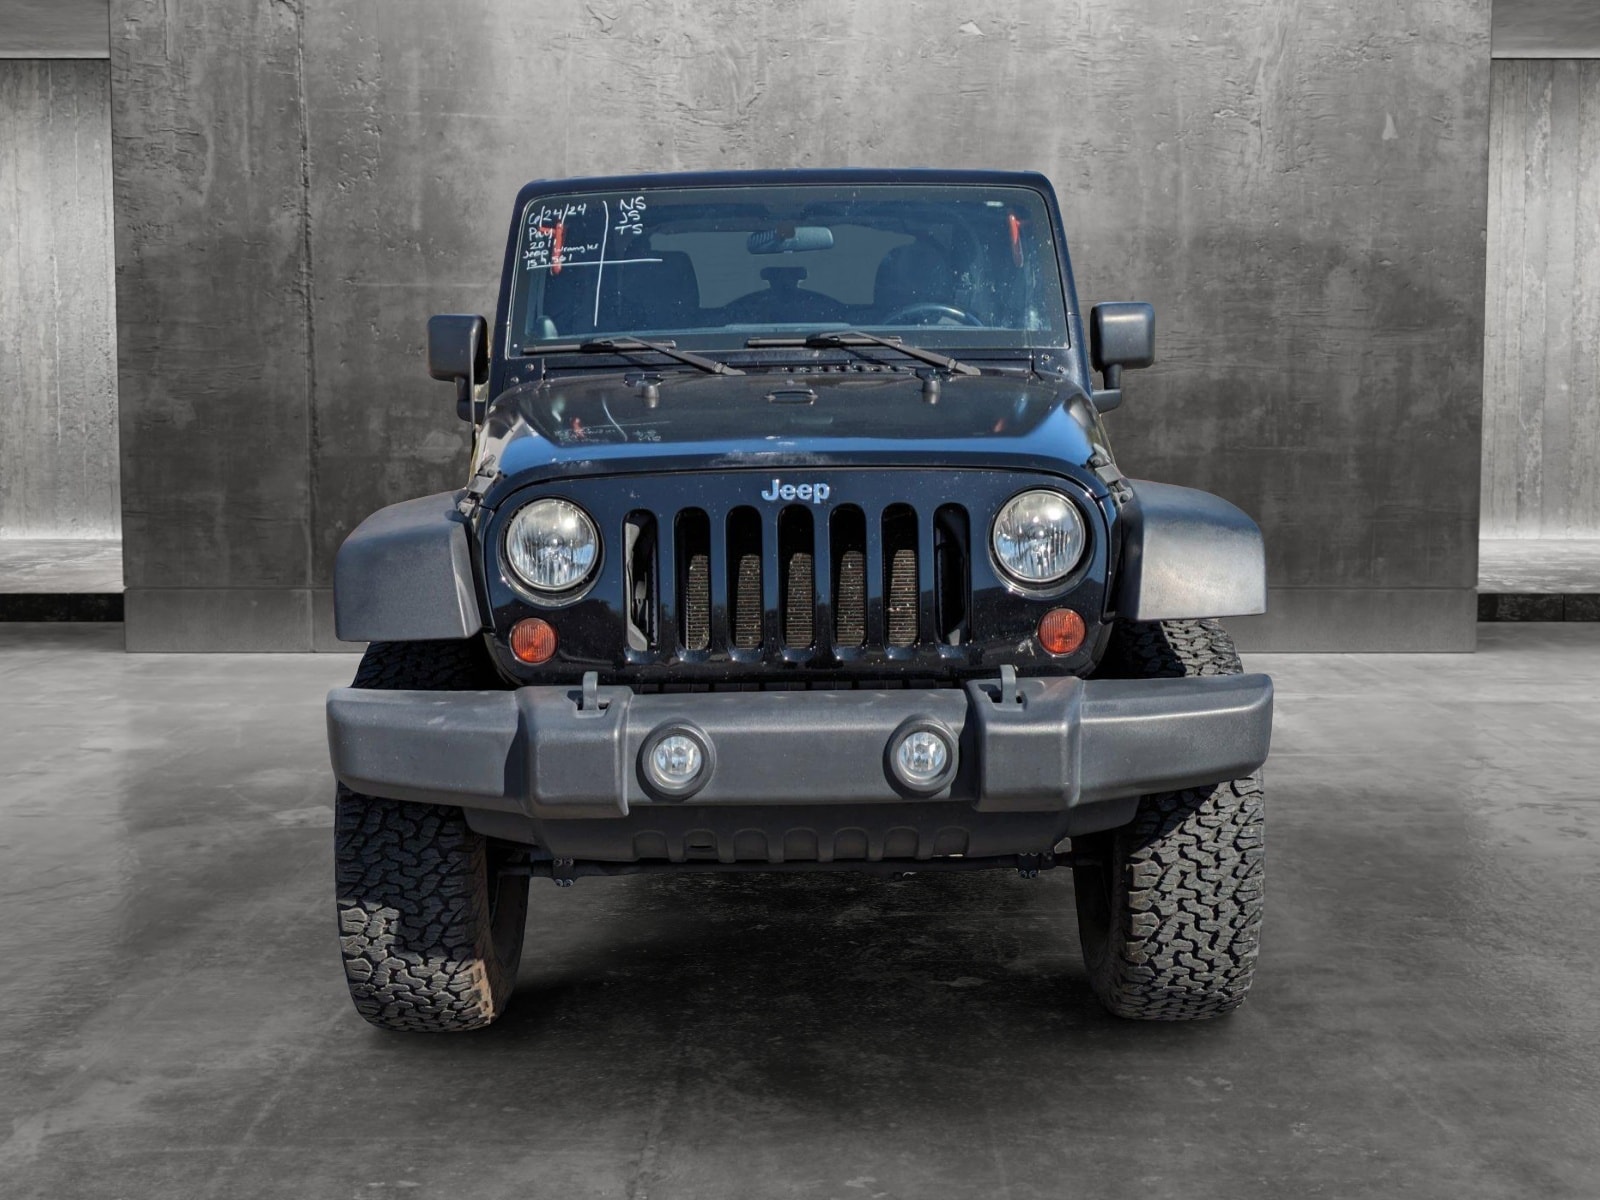 Used 2011 Jeep Wrangler Sport with VIN 1J4AA2D1XBL546705 for sale in Las Vegas, NV